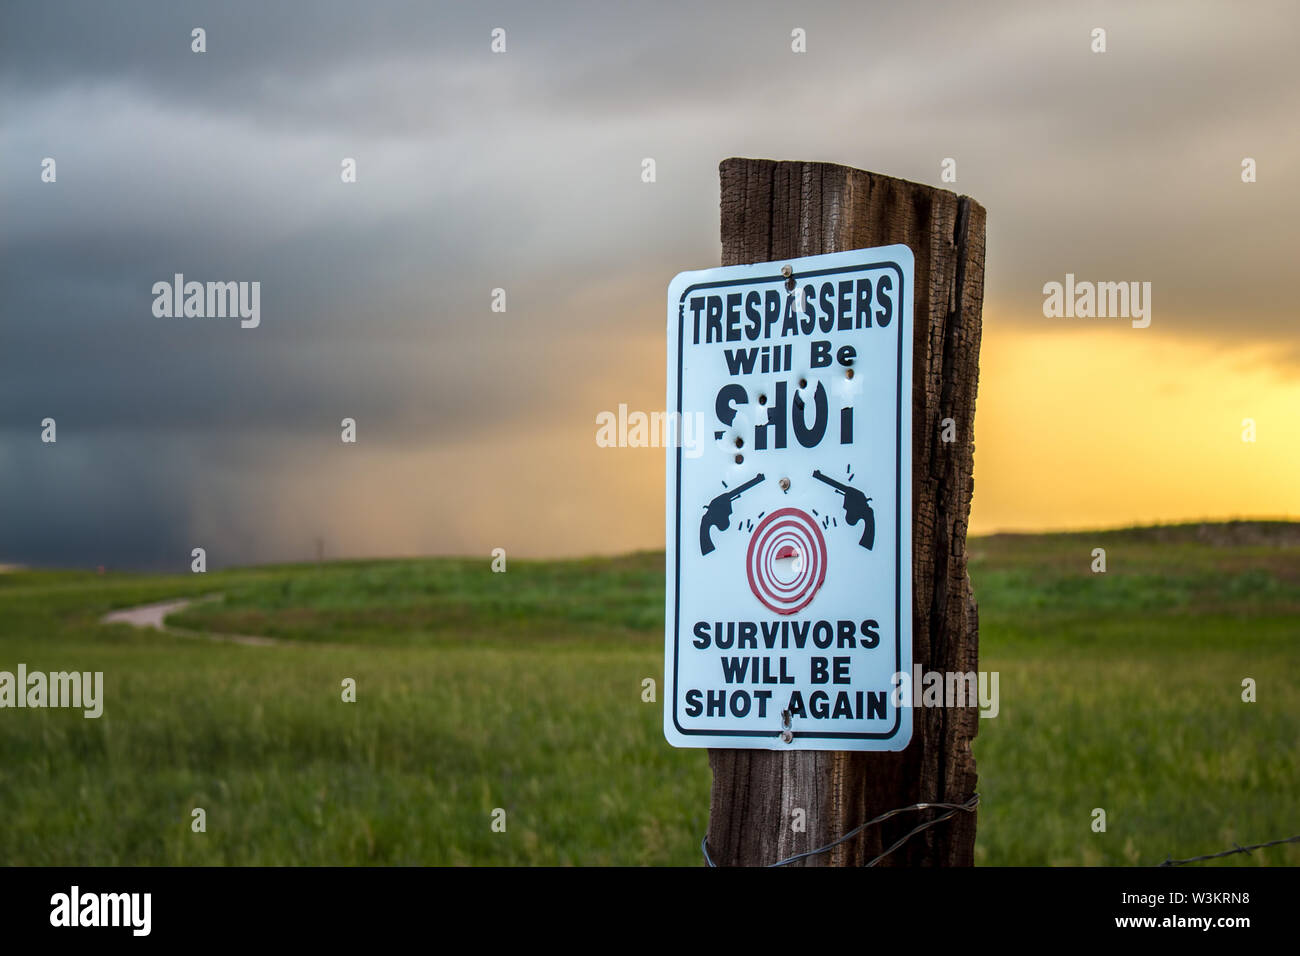 A no trespassing sign riddled with bullet holes reads: Trespassers will be shot. Survivors will be shot again. Stock Photo